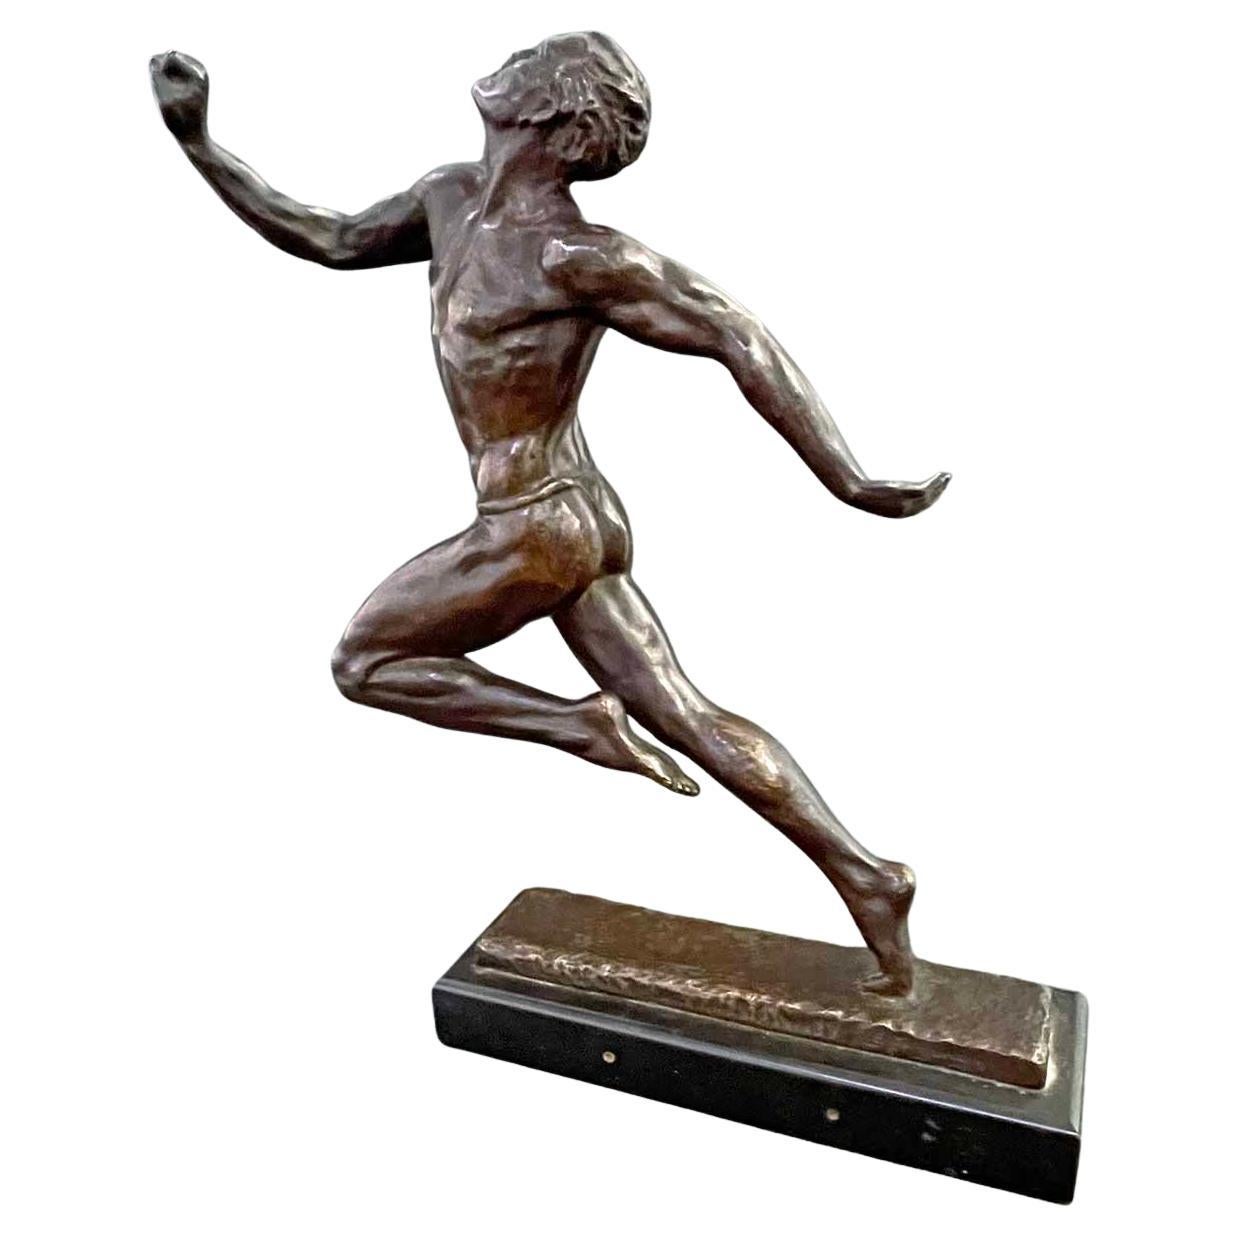 « At the Finish Line, « Rare Art Deco Bronze Runner with Nude Male, Le Faguays en vente